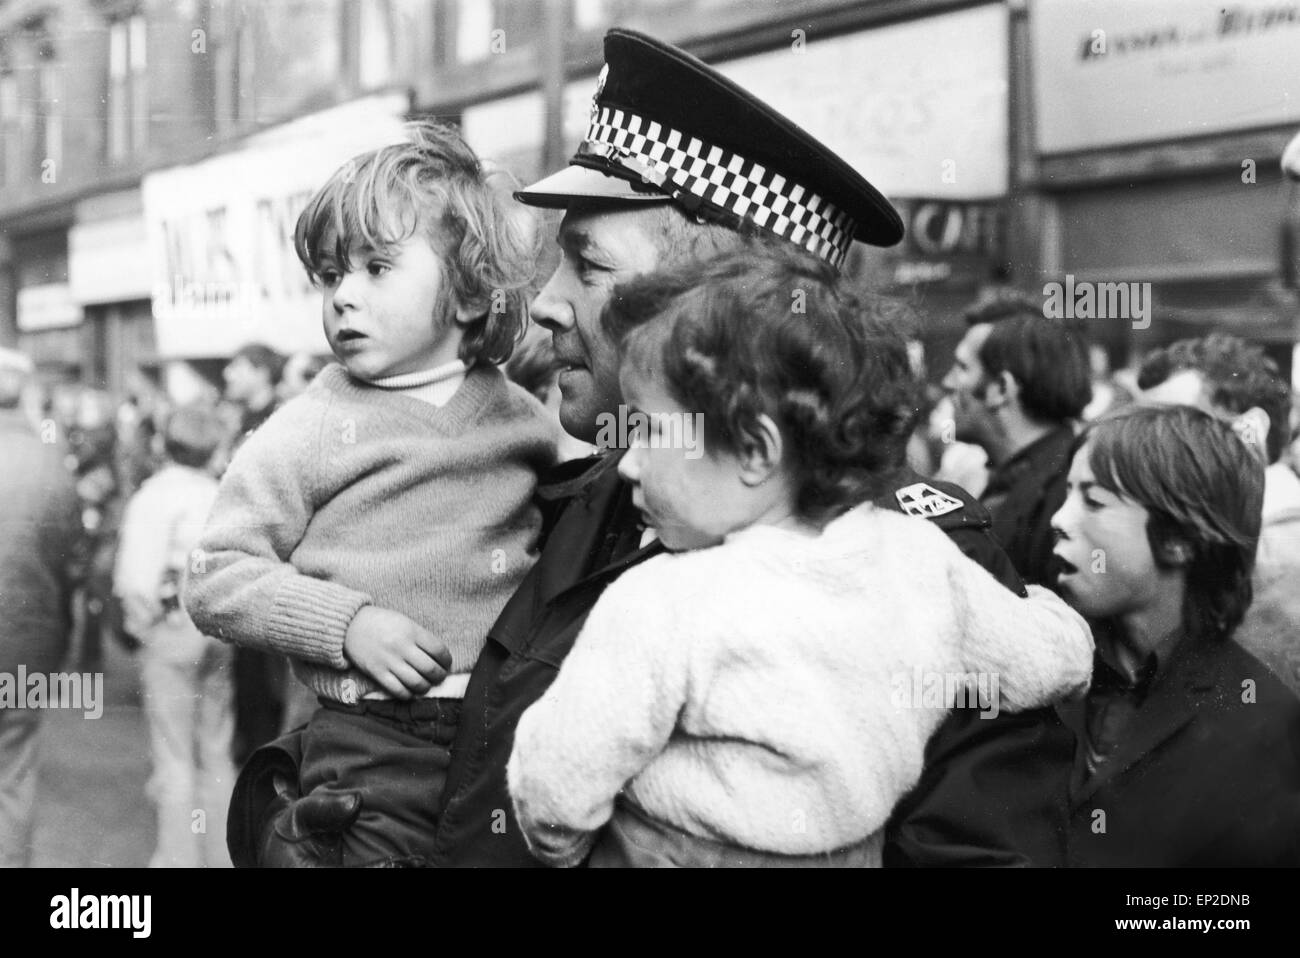 Fire at Maryhill Road Glasgow. Fire breaks out in an unoccupied furniture shop spreading along the row of shops and trapping some families in their homes above. Fifty families were made homeless and one woman and one Fire Officer lost their lives. Saturday, 18th November 1972. Pictured Robert and Isobel McPhee aged three and four, held in safety by a police officer after their rescue from the fire. Stock Photo